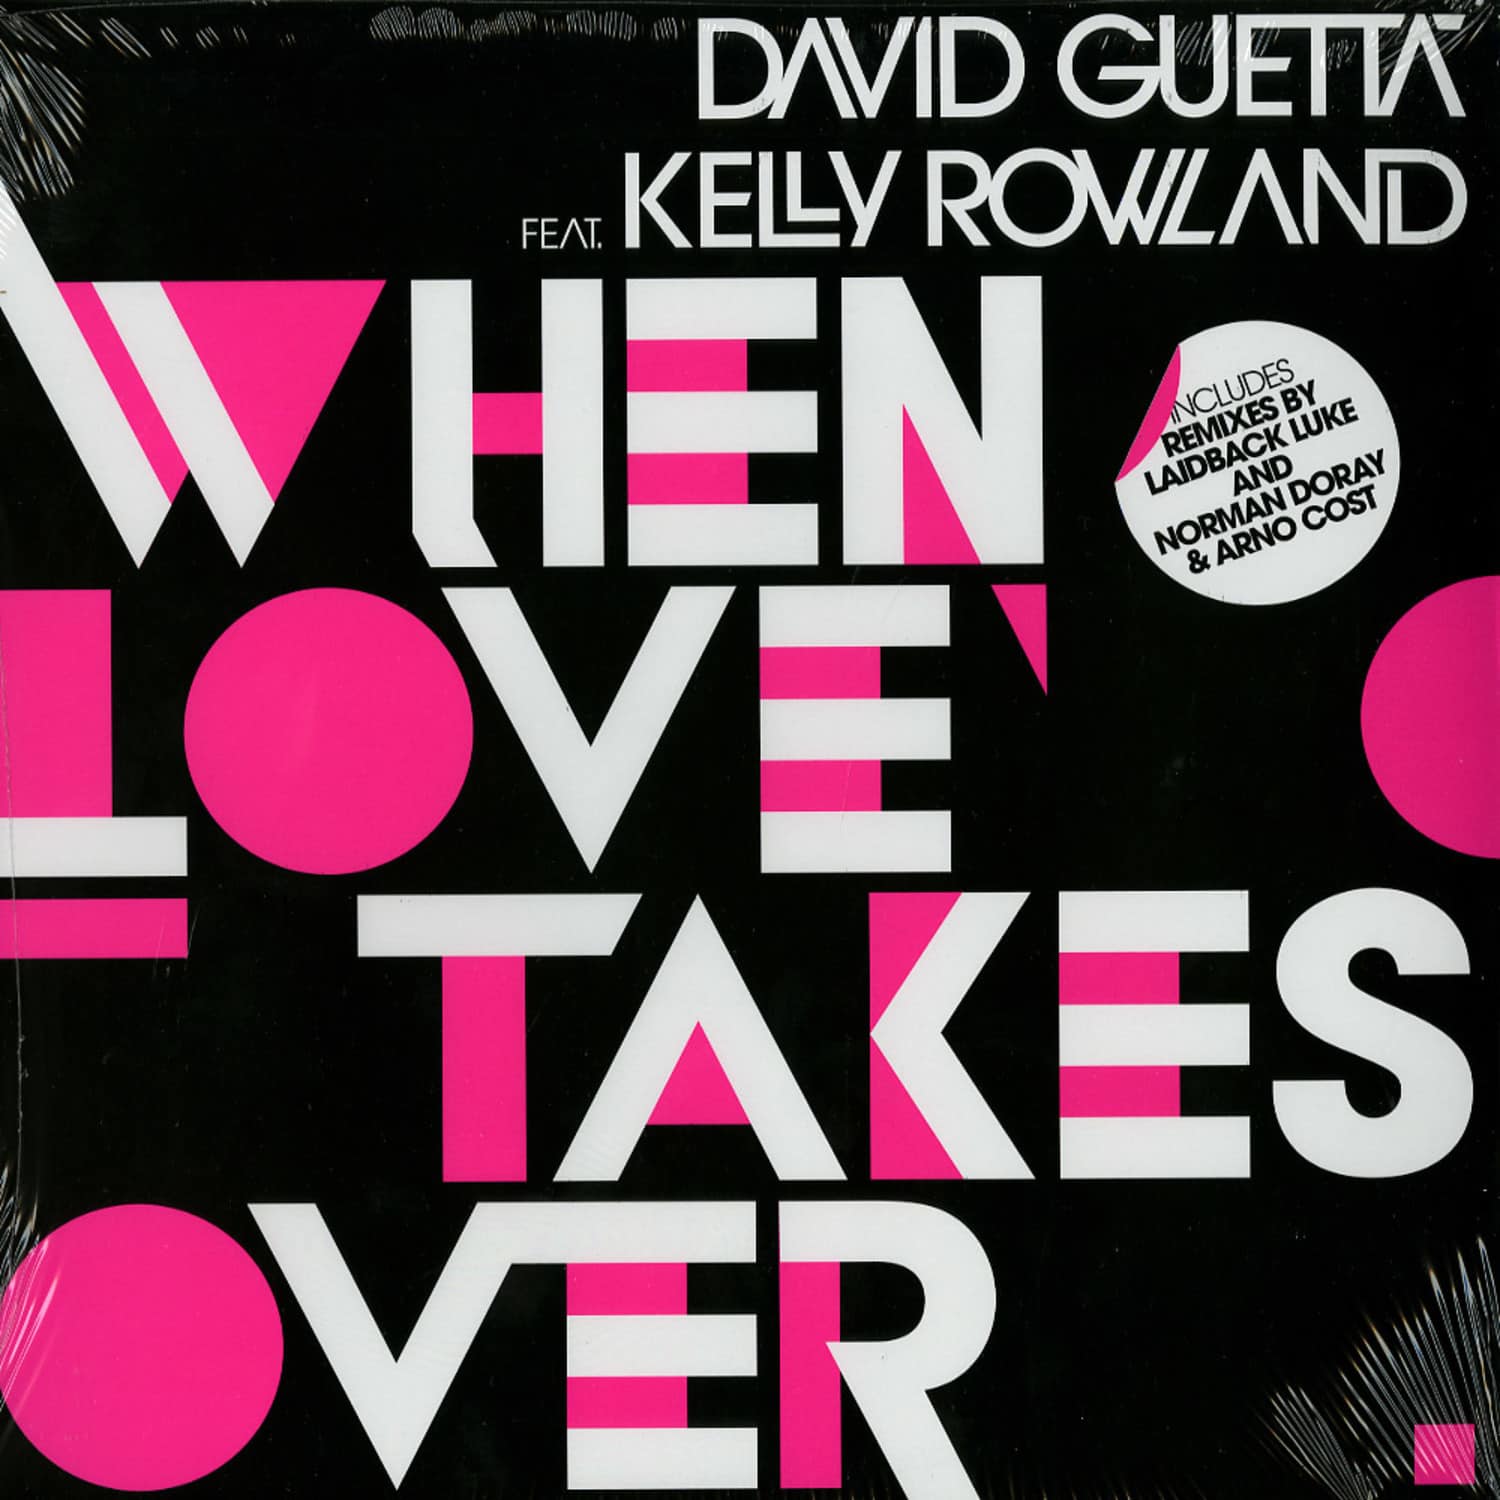 David Guetta ft. Kelly Rowland - WHEN LOVE TAKES OVER 